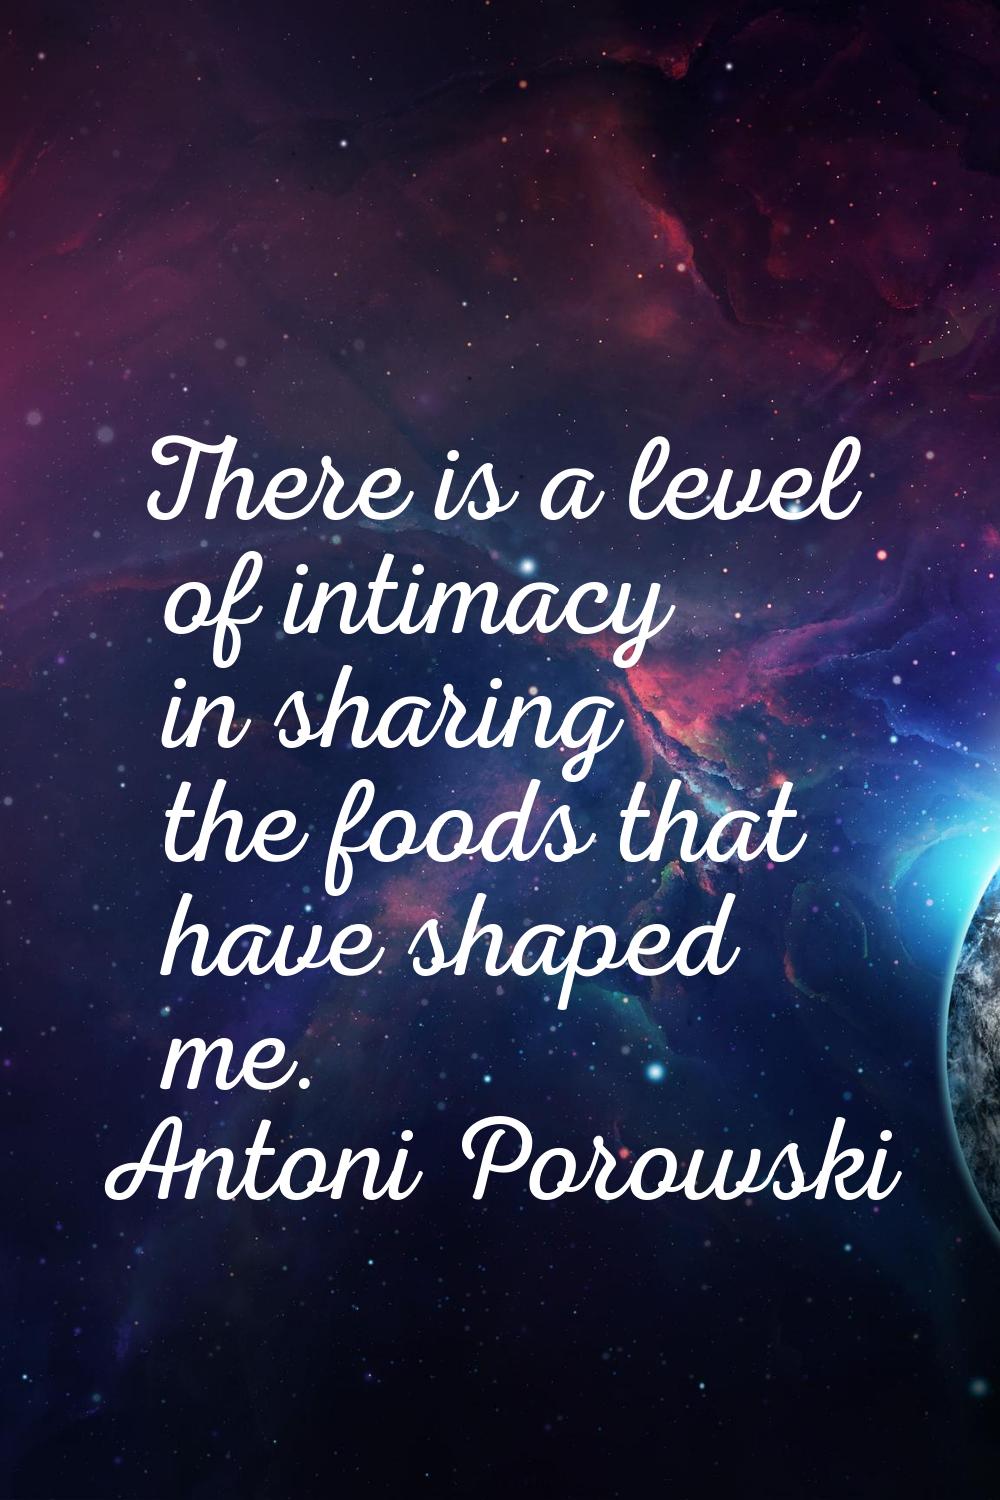 There is a level of intimacy in sharing the foods that have shaped me.